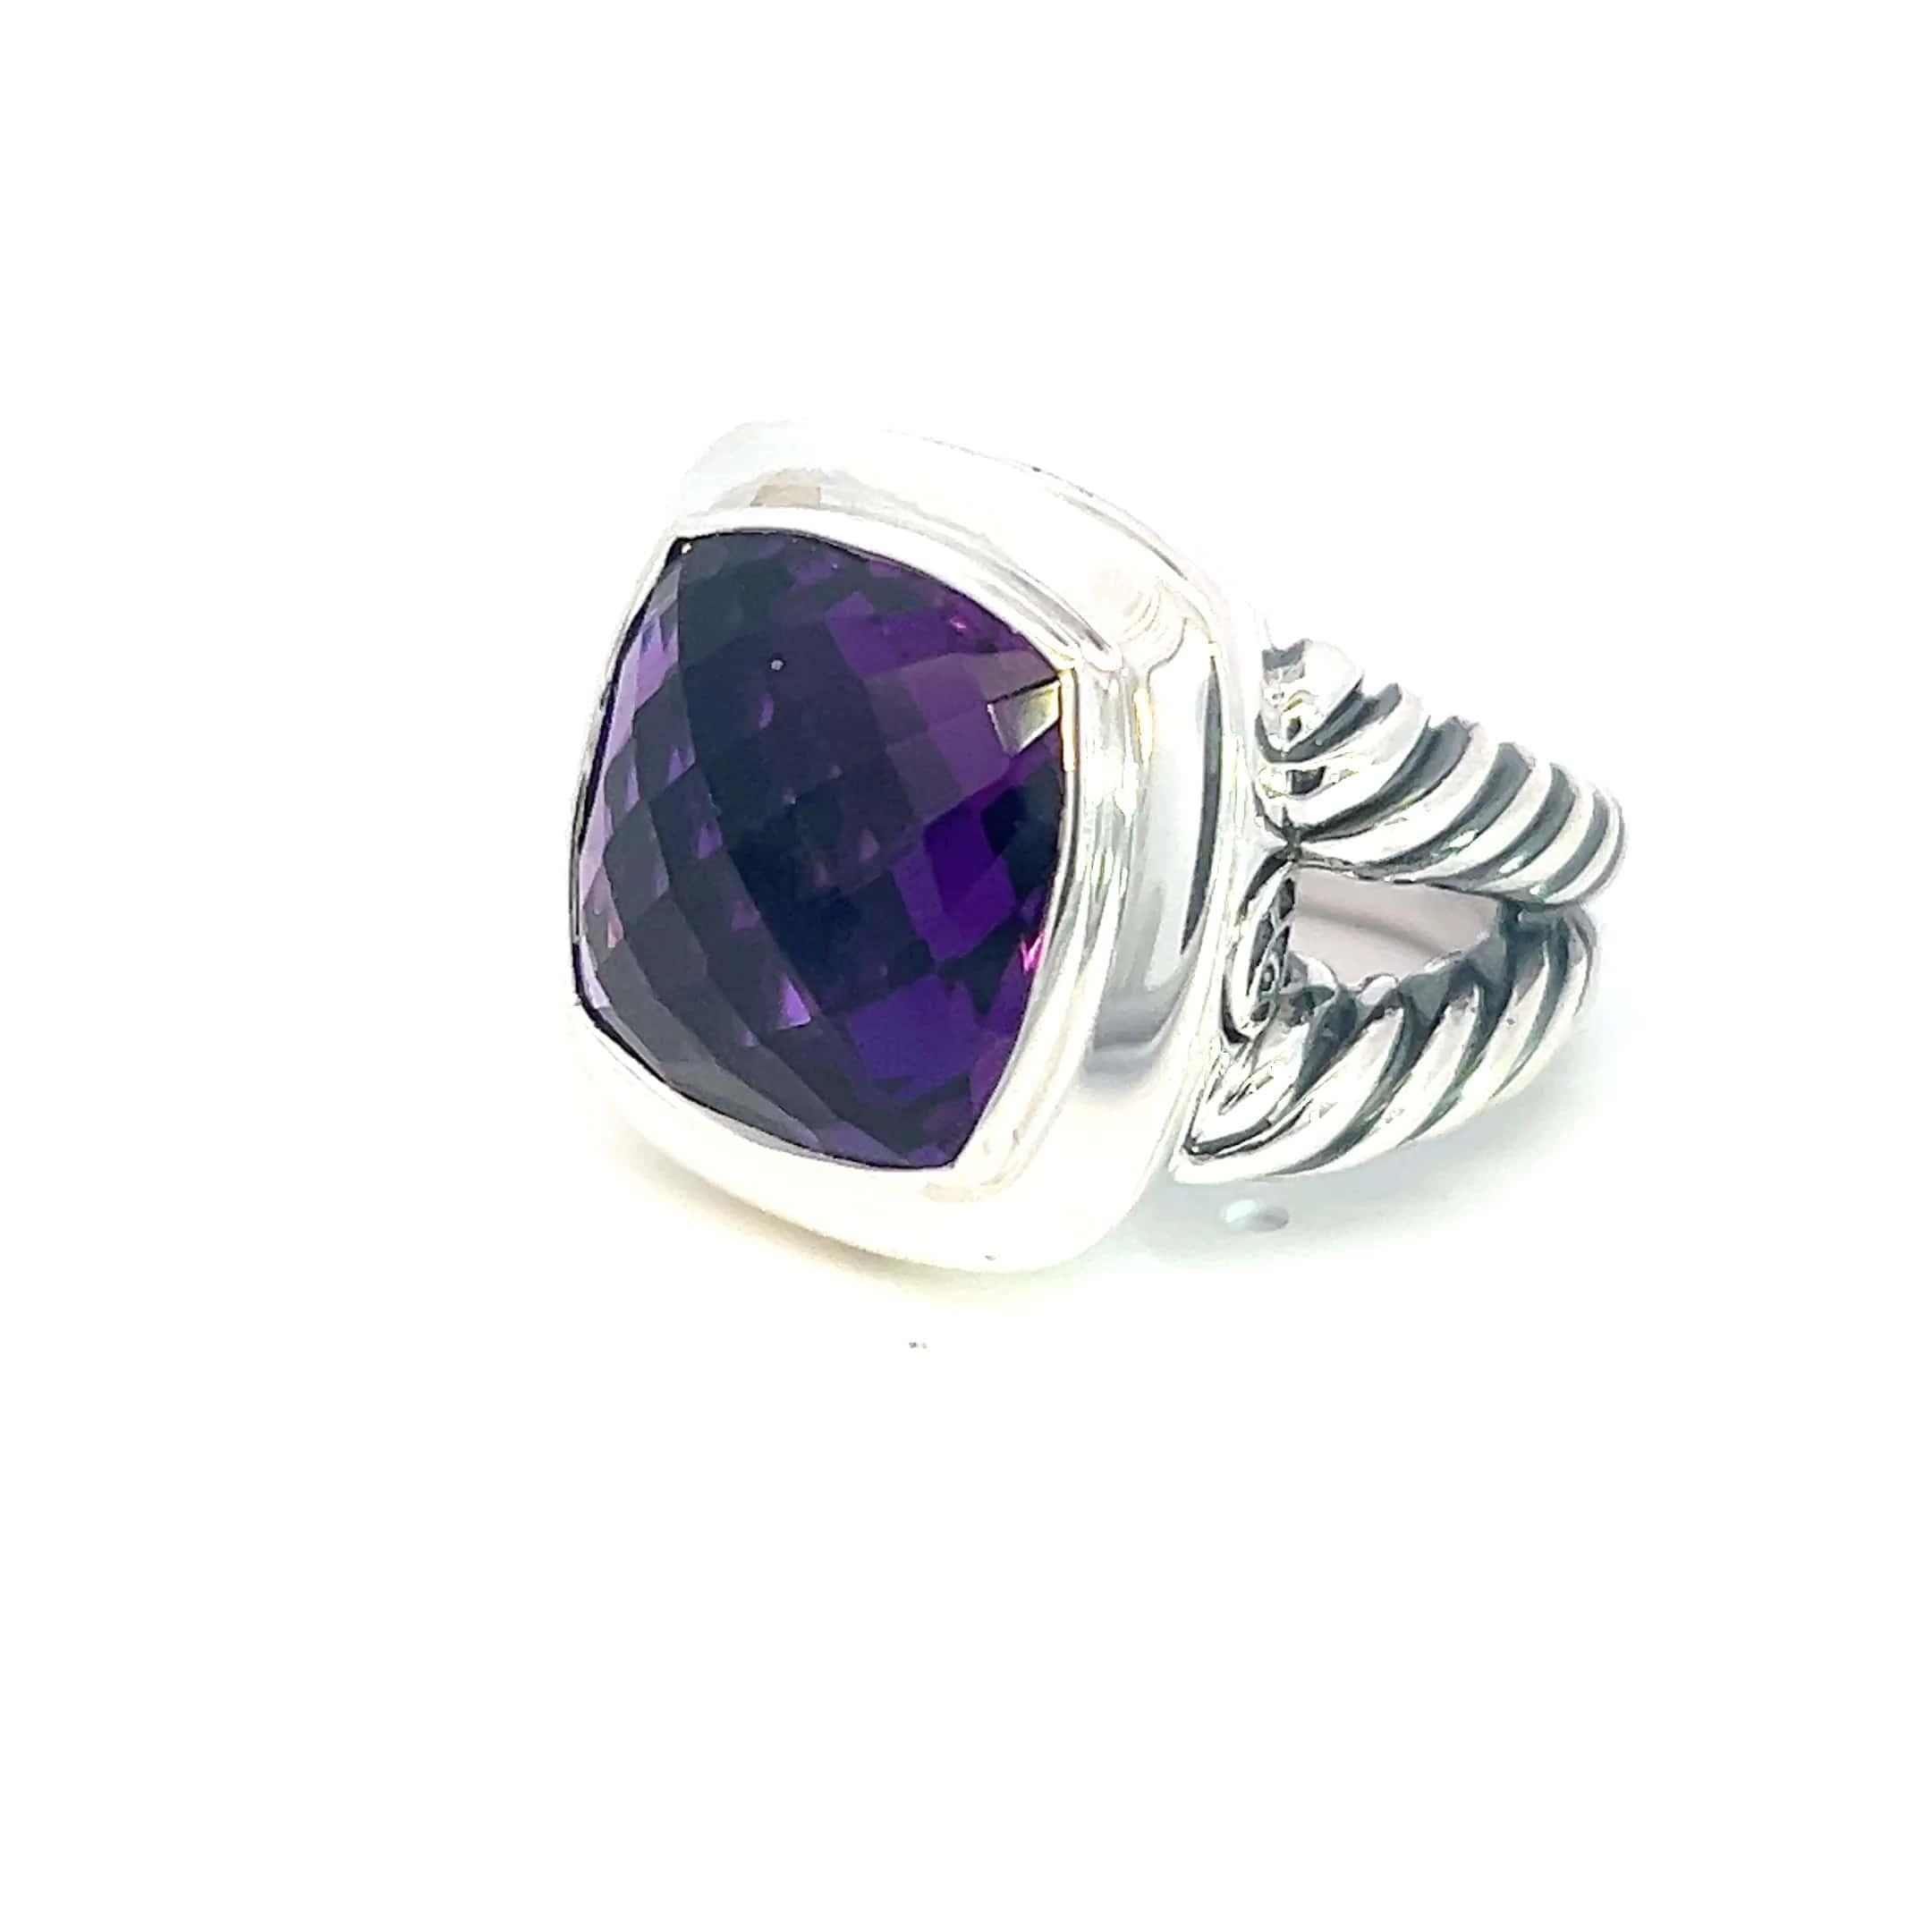 Authentic David Yurman Estate Amethyst Albion Ring 6 Silver 14 mm DY334

Retail: $790

Ring from ALBION COLLECTION

This elegant Authentic David Yurman ring is made of sterling silver.

TRUSTED SELLER SINCE 2002

PLEASE SEE OUR HUNDREDS OF POSITIVE